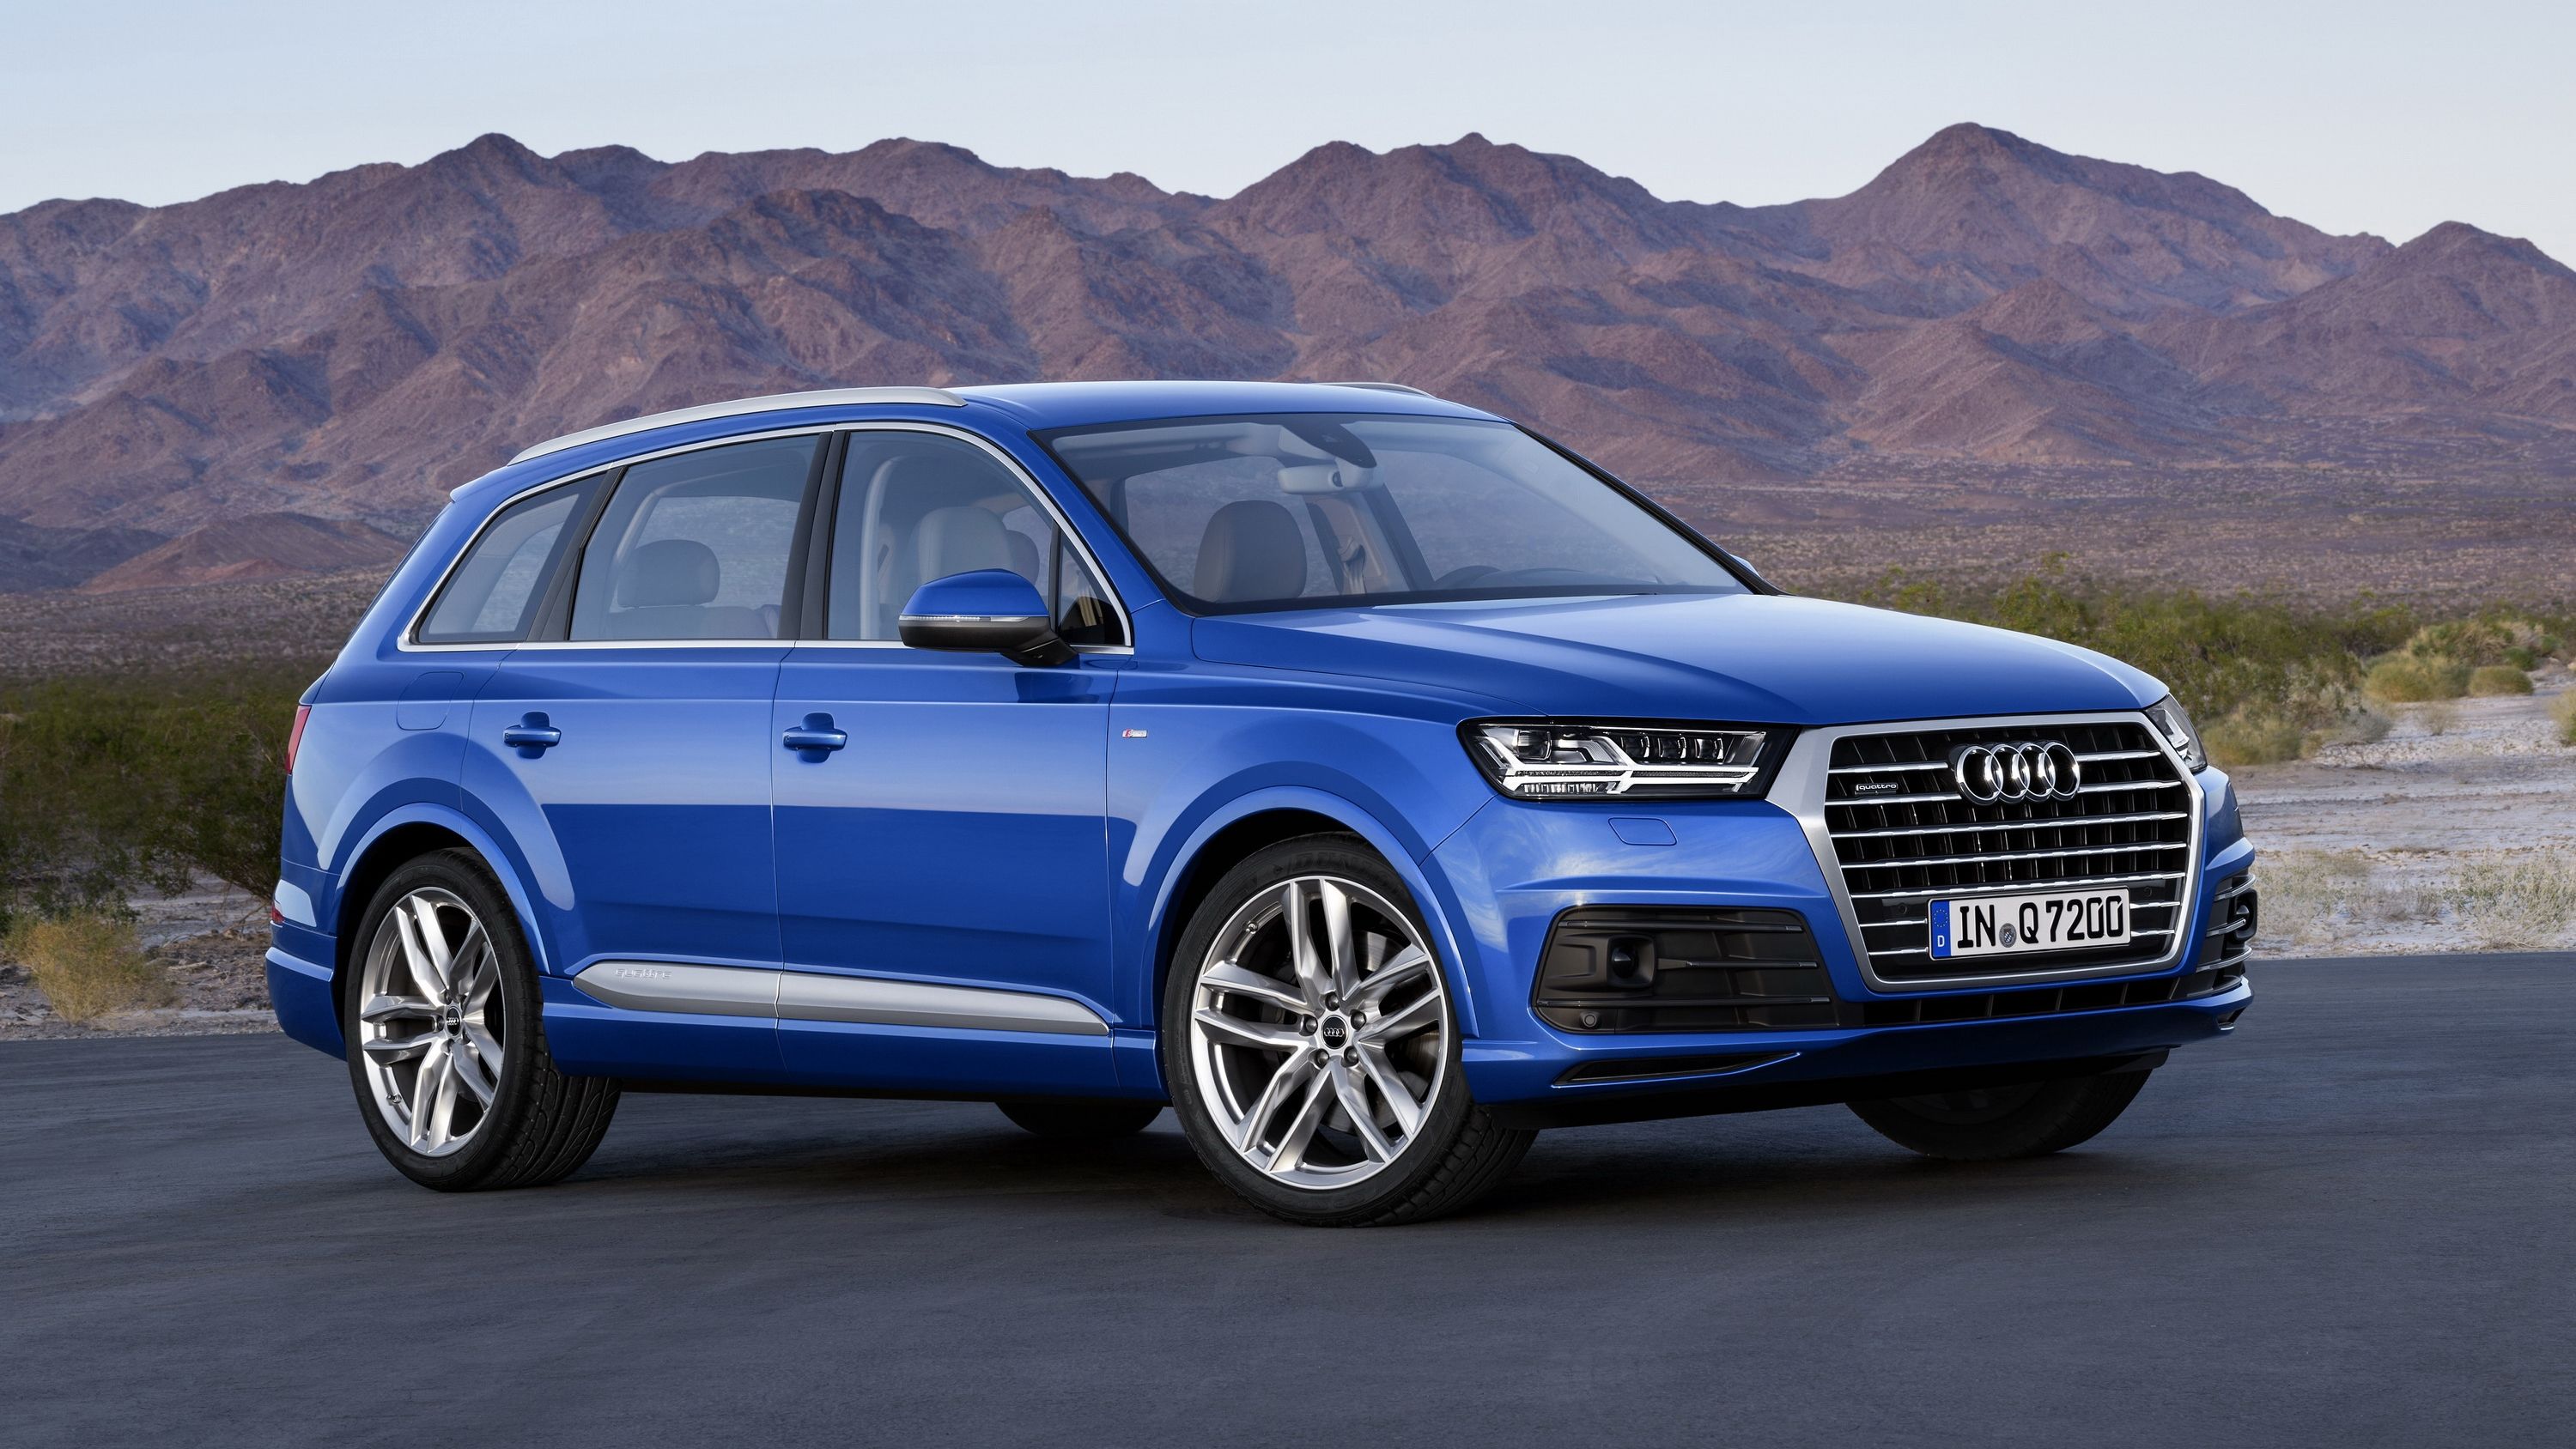  Rumor has it that the Q7 is getting an RS version, and now the folks at Audi have reportedly confirmed it. 